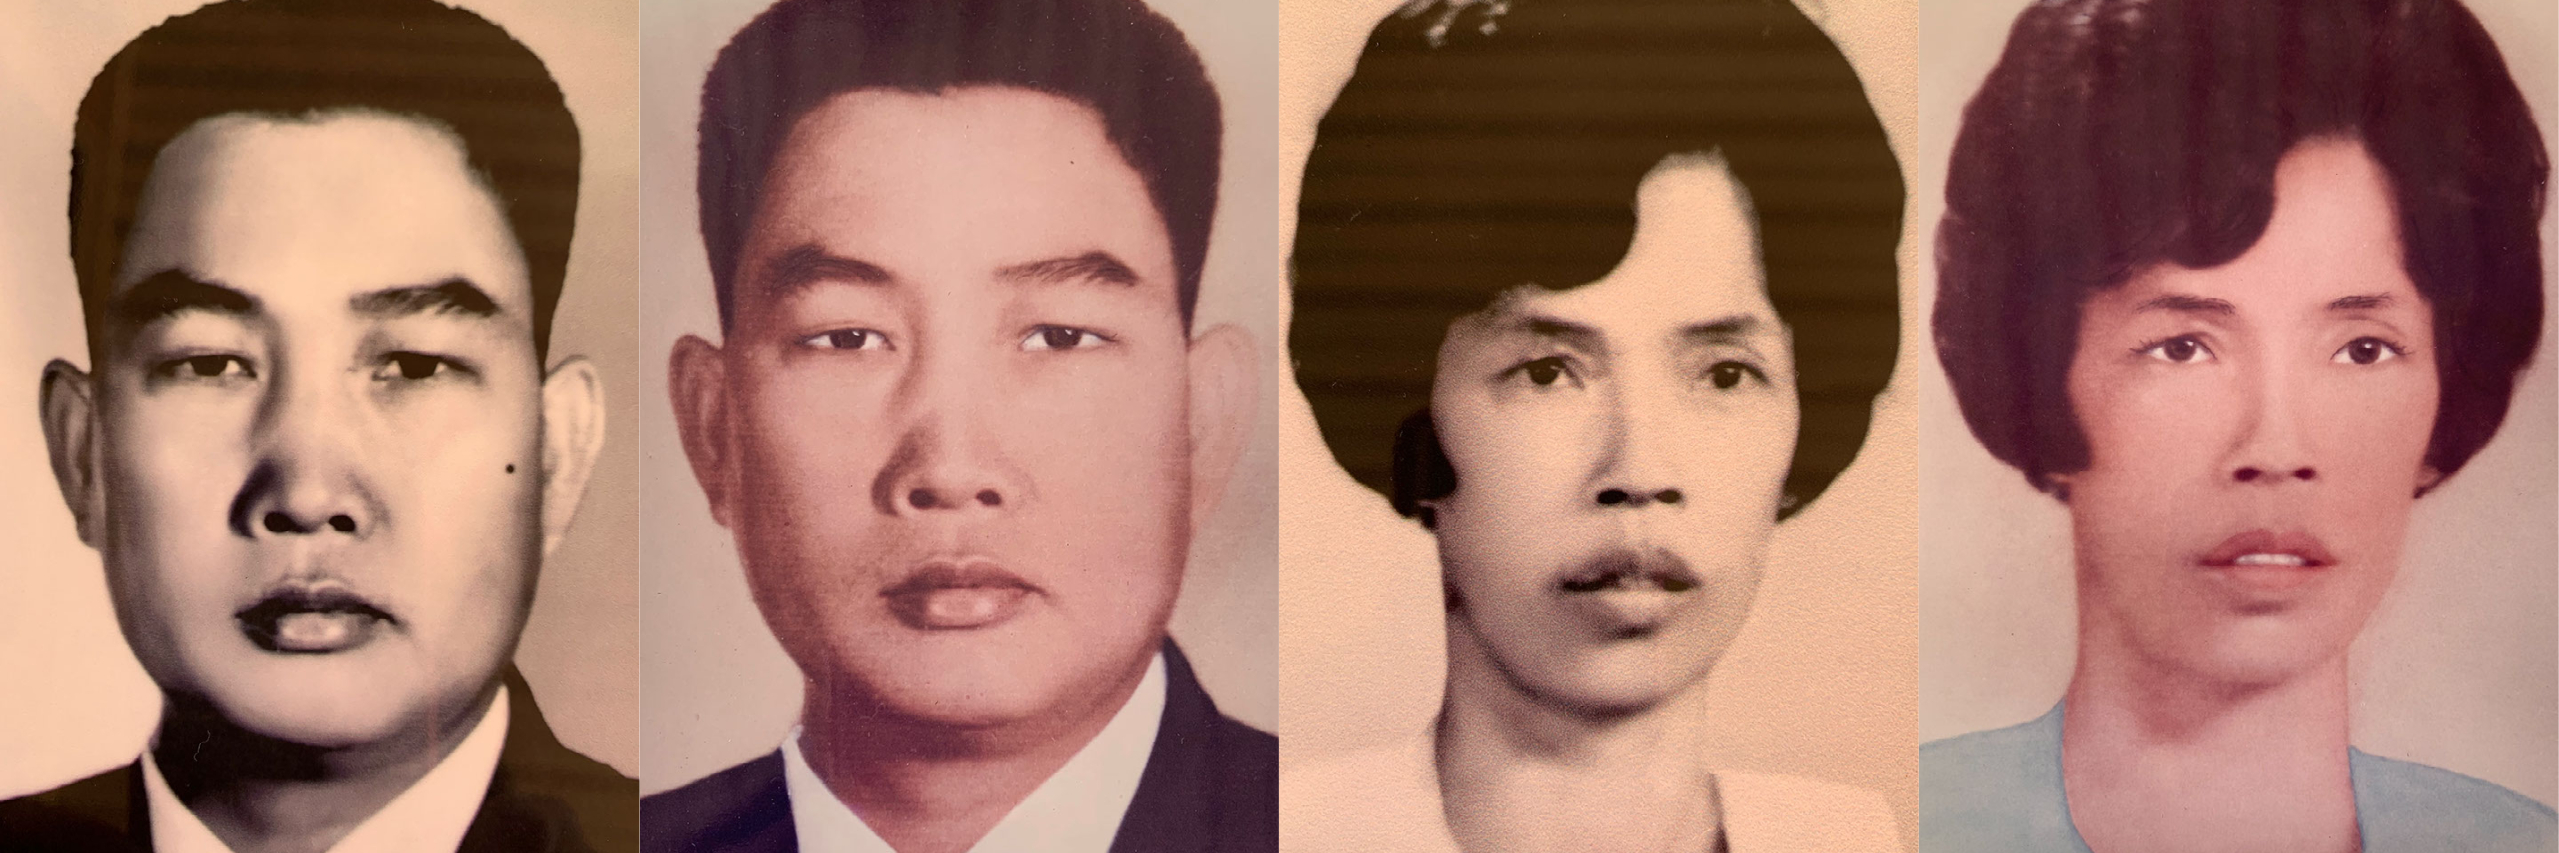 In the 1980s, Tara Tran’s aunt asked a photo lab technician to colorize images of her parents, Cambodian refugees Vouch Khim Bout and Khour Tek Pa.